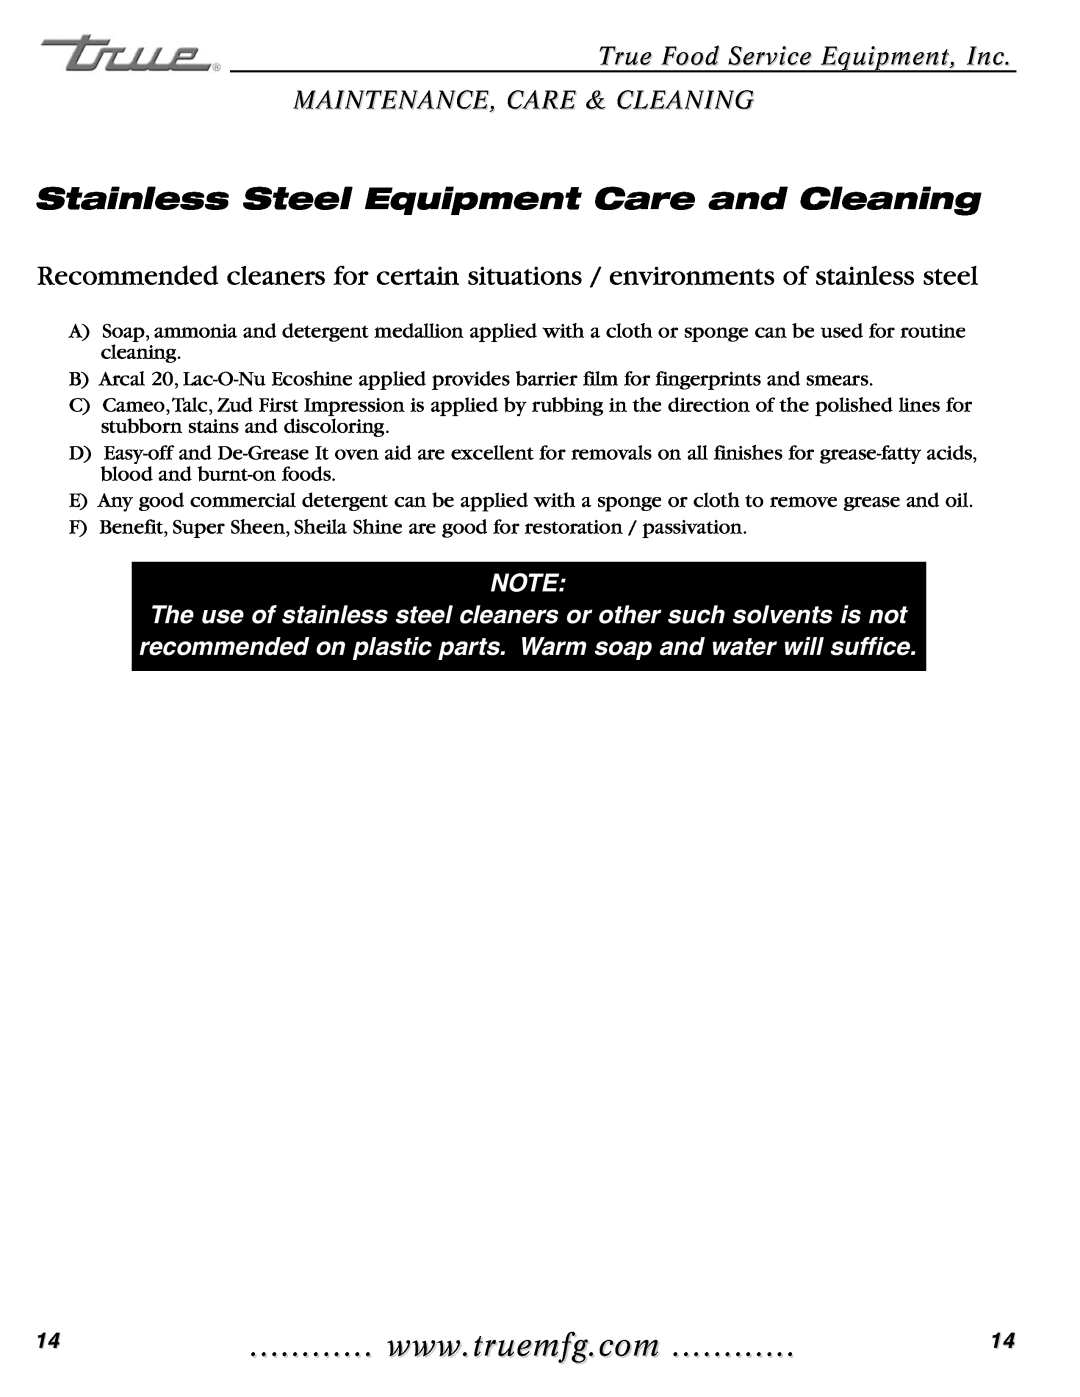 True Manufacturing Company TWT-60F, TUC-27FG Stainless Steel Equipment Care and Cleaning, True Food Service Equipment, Inc 